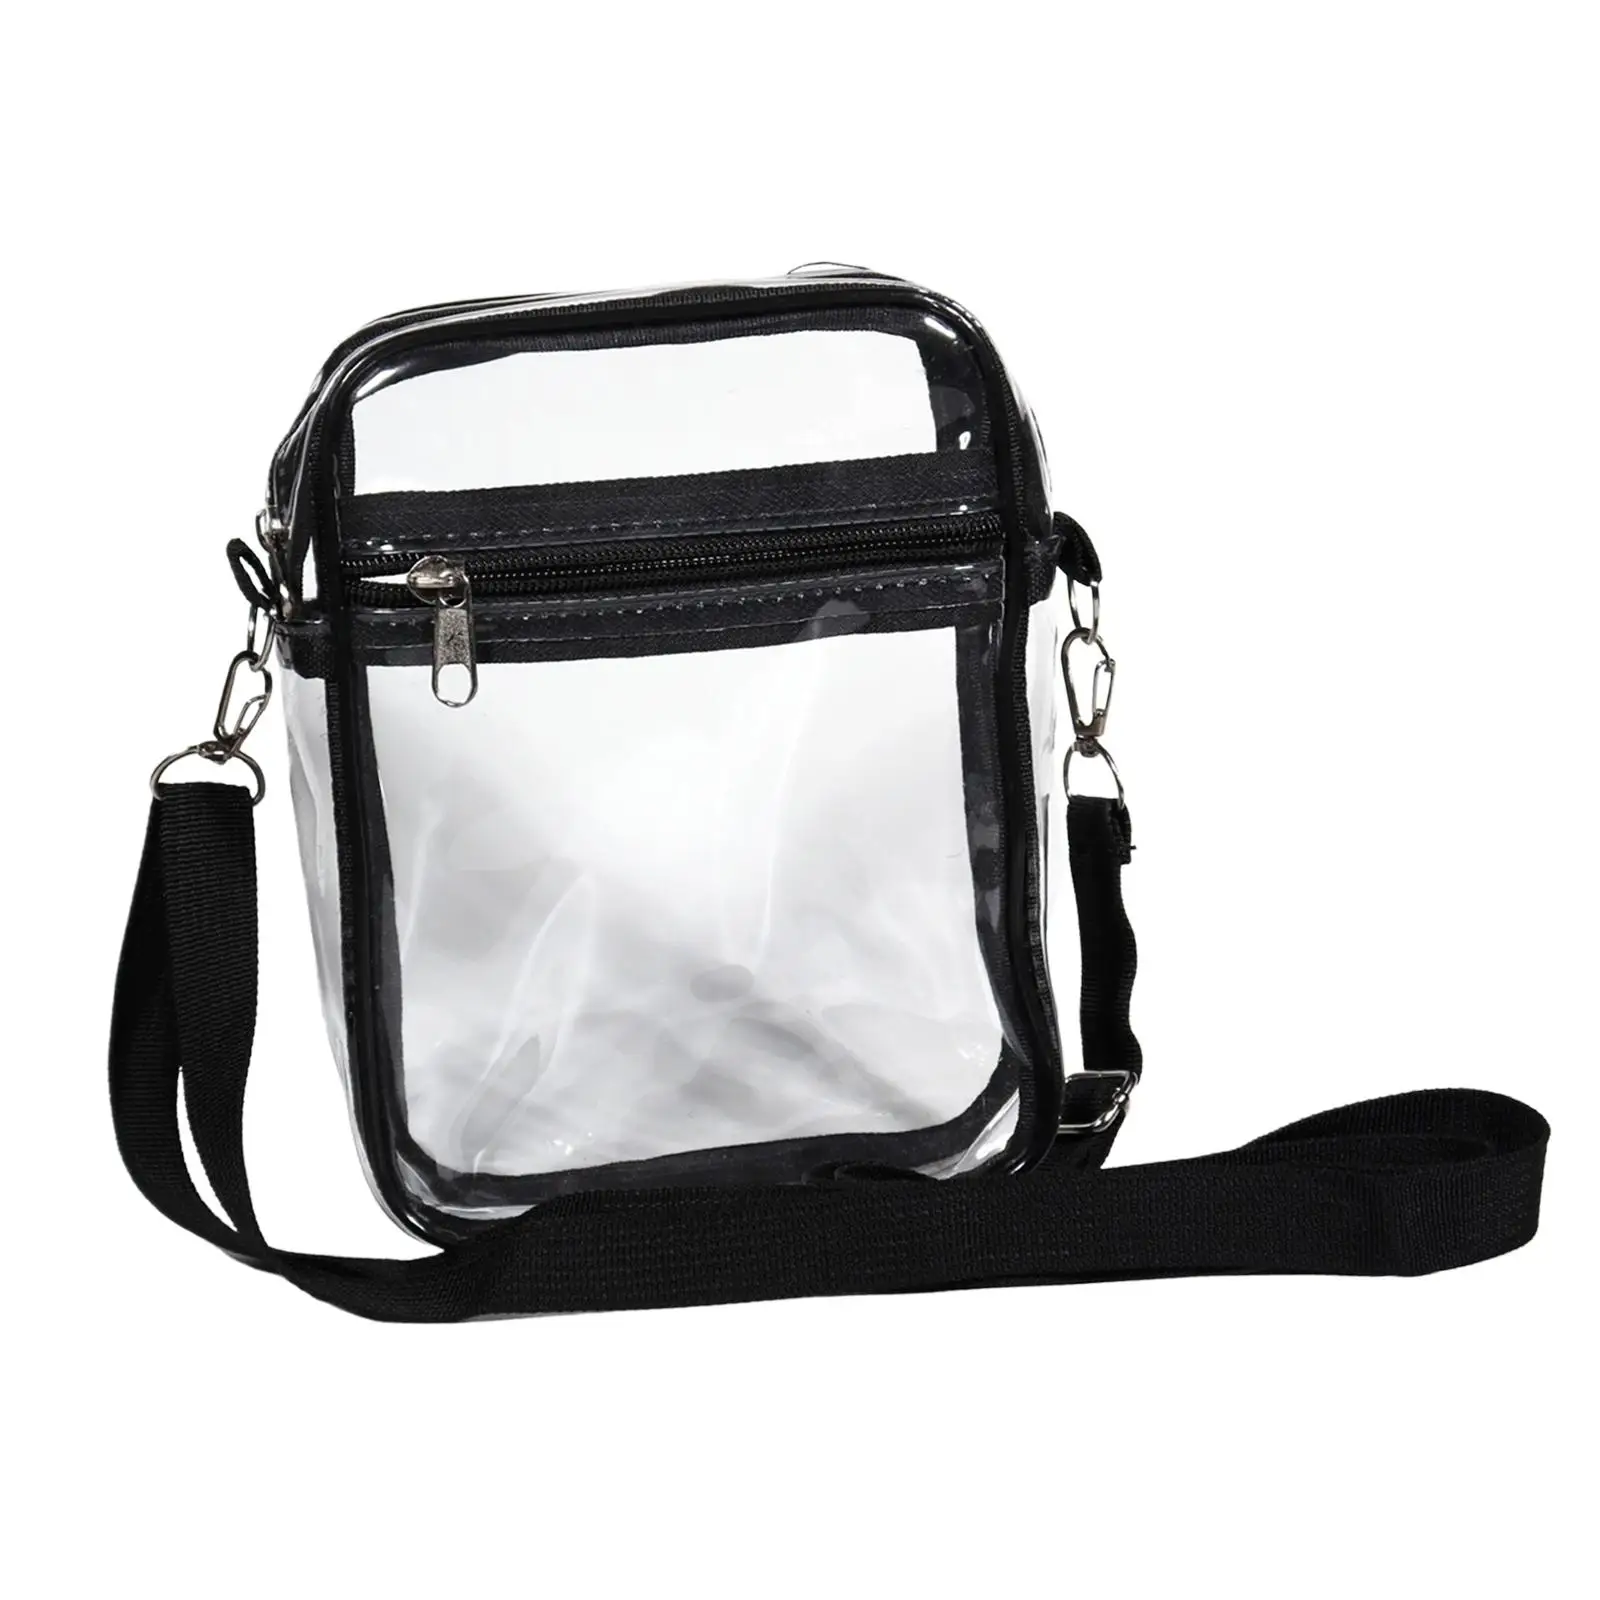 Clear Bag PVC Waterproof Transparent Bag for Travel Airport Security Check Outdoor Sporting Events Sports